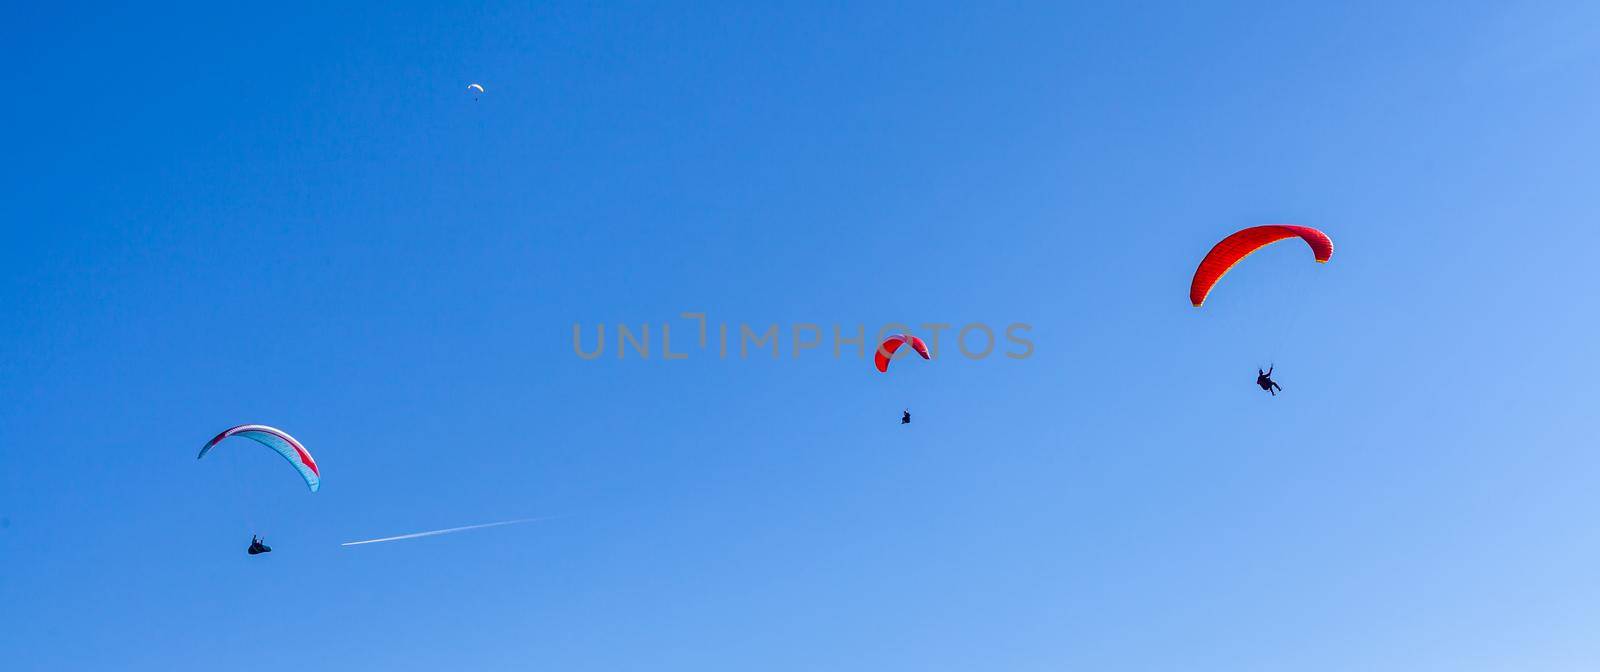 sports paragliding on a parachute over the countryside.